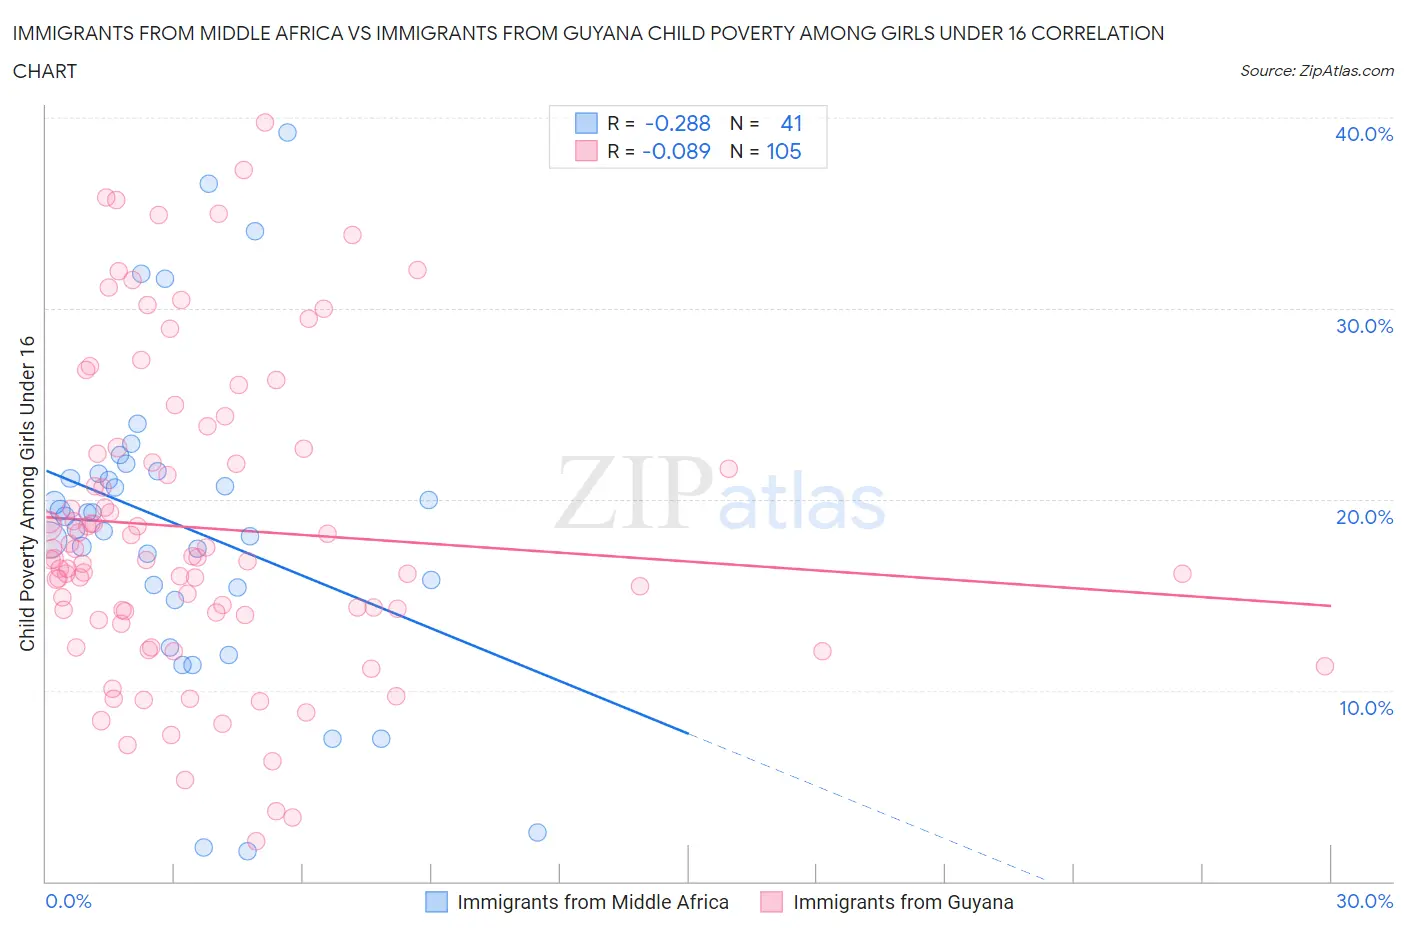 Immigrants from Middle Africa vs Immigrants from Guyana Child Poverty Among Girls Under 16